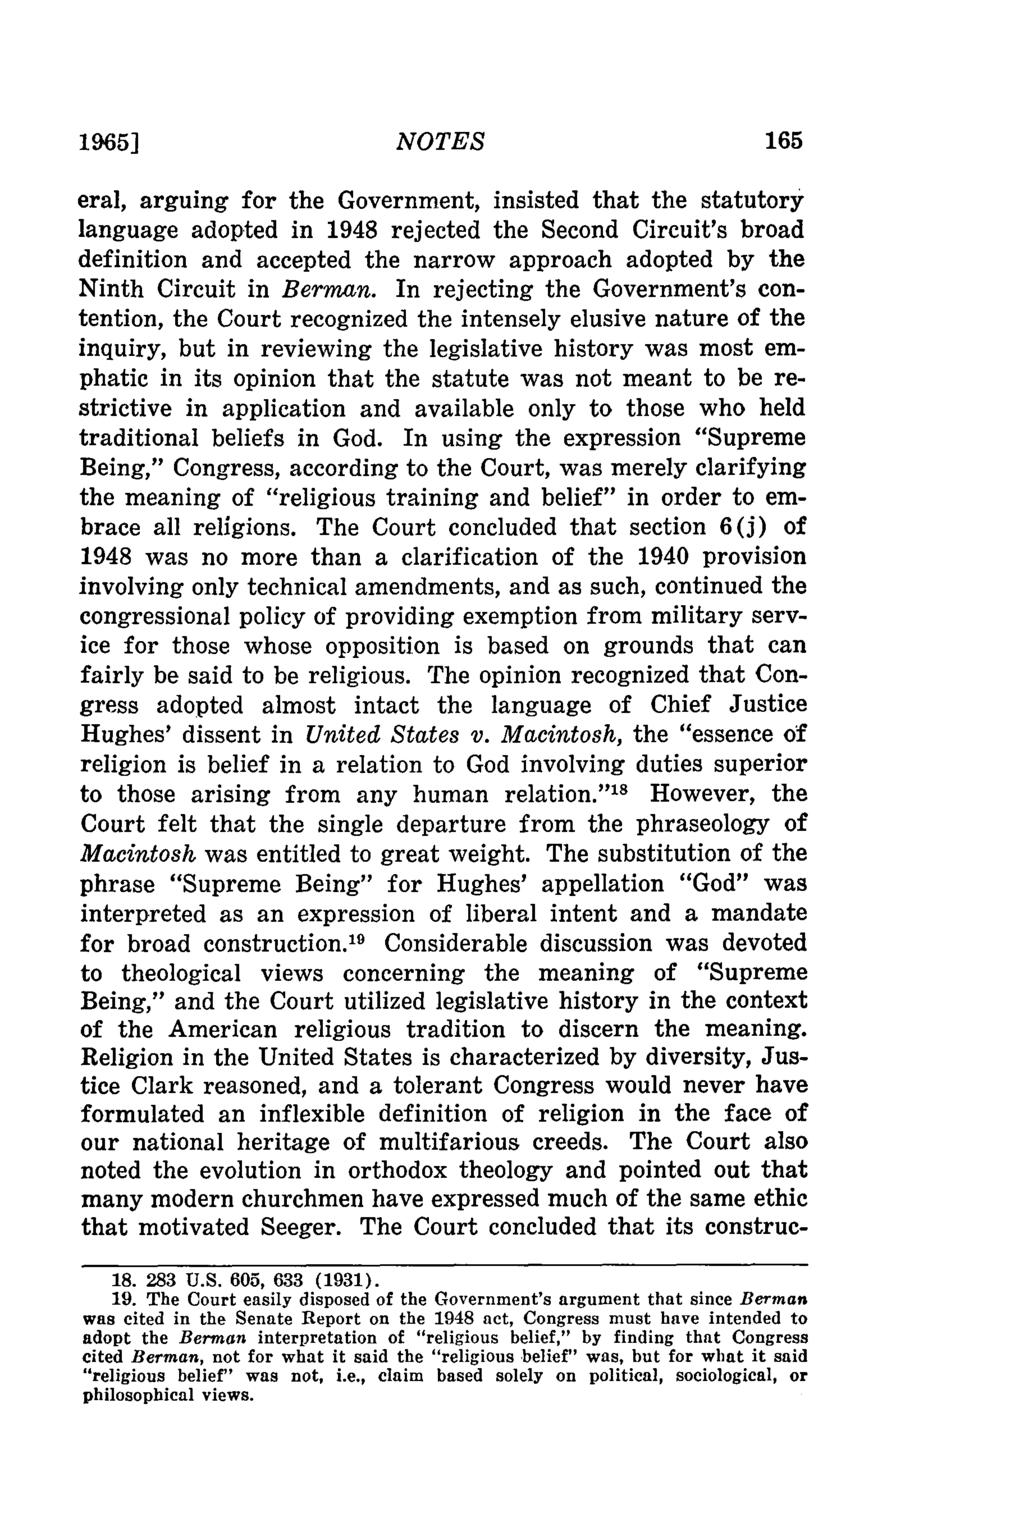 1965] NOTES eral, arguing for the Government, insisted that the statutory language adopted in 1948 rejected the Second Circuit's broad definition and accepted the narrow approach adopted by the Ninth